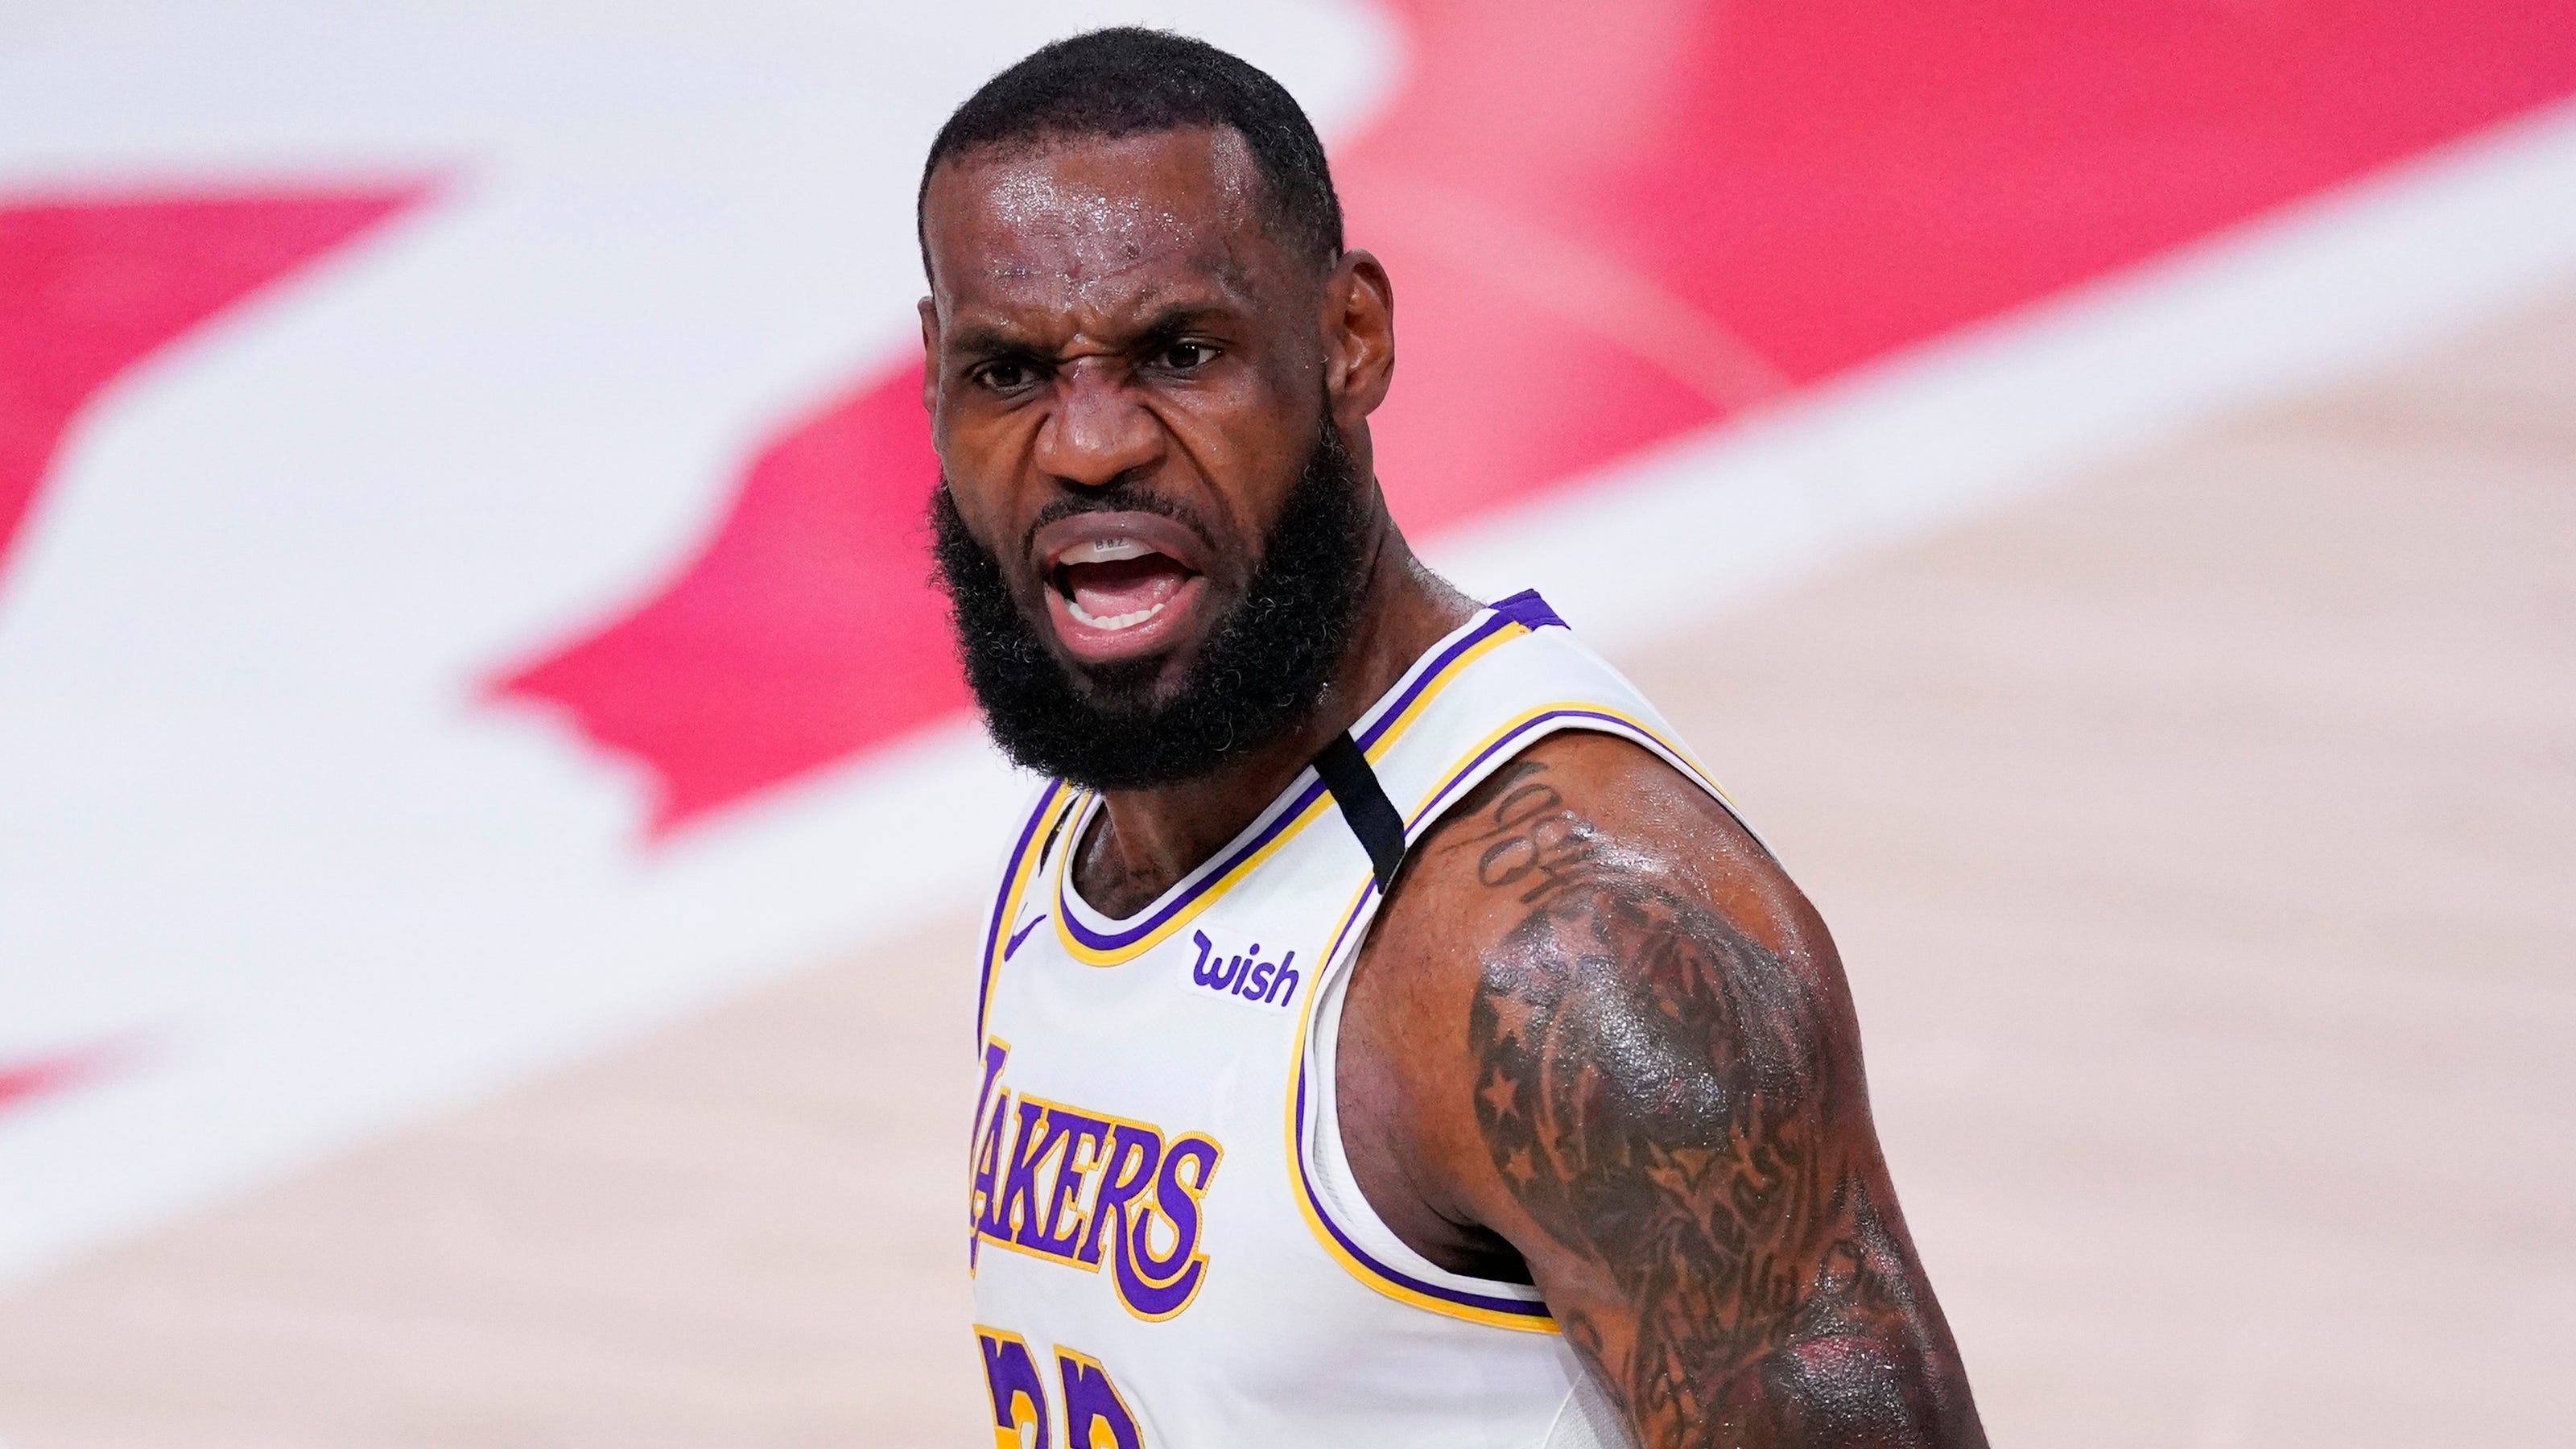 Lakers Lebron Senses The Moment And Pounces To Close Out Rockets